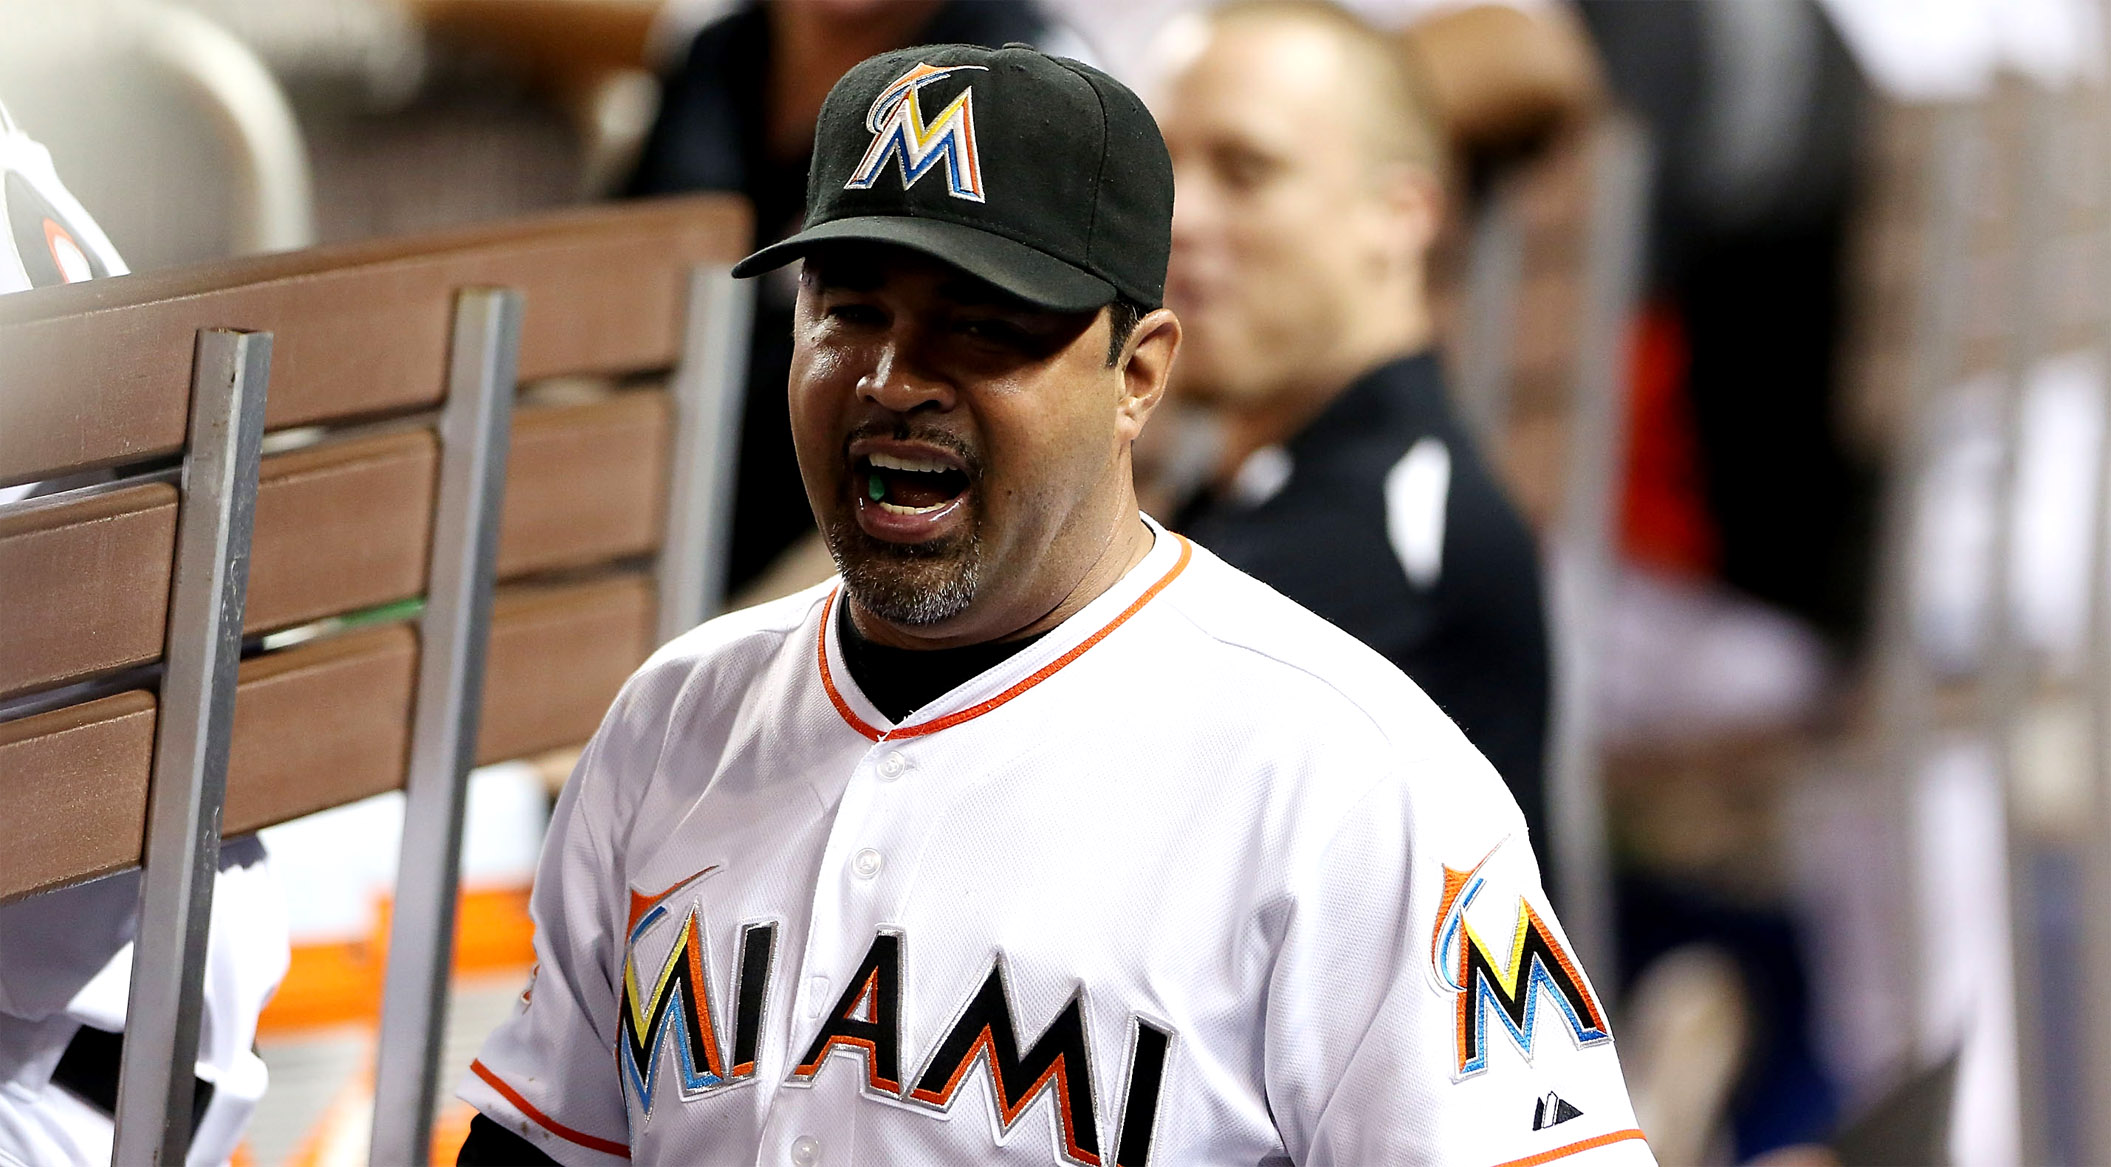 MLB Fans Reactions To Padres Considering Ozzie Guillen For Manager